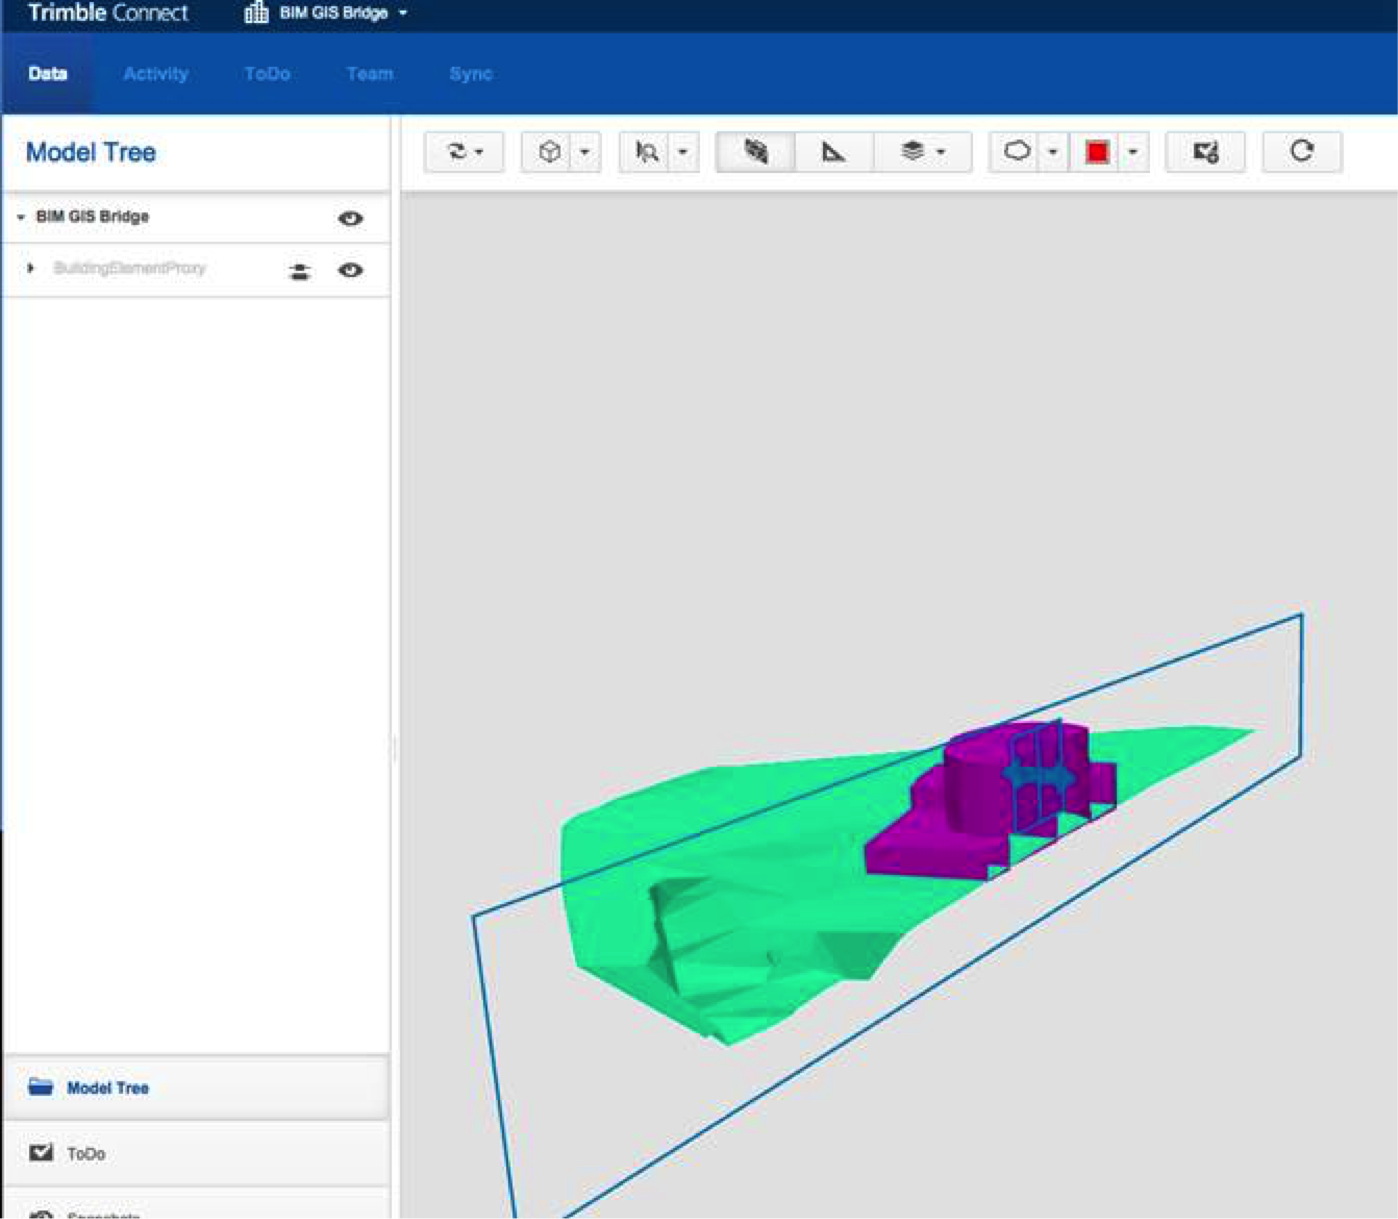 An FME-generated IFC model uploaded to Trimble Connect - in seconds.